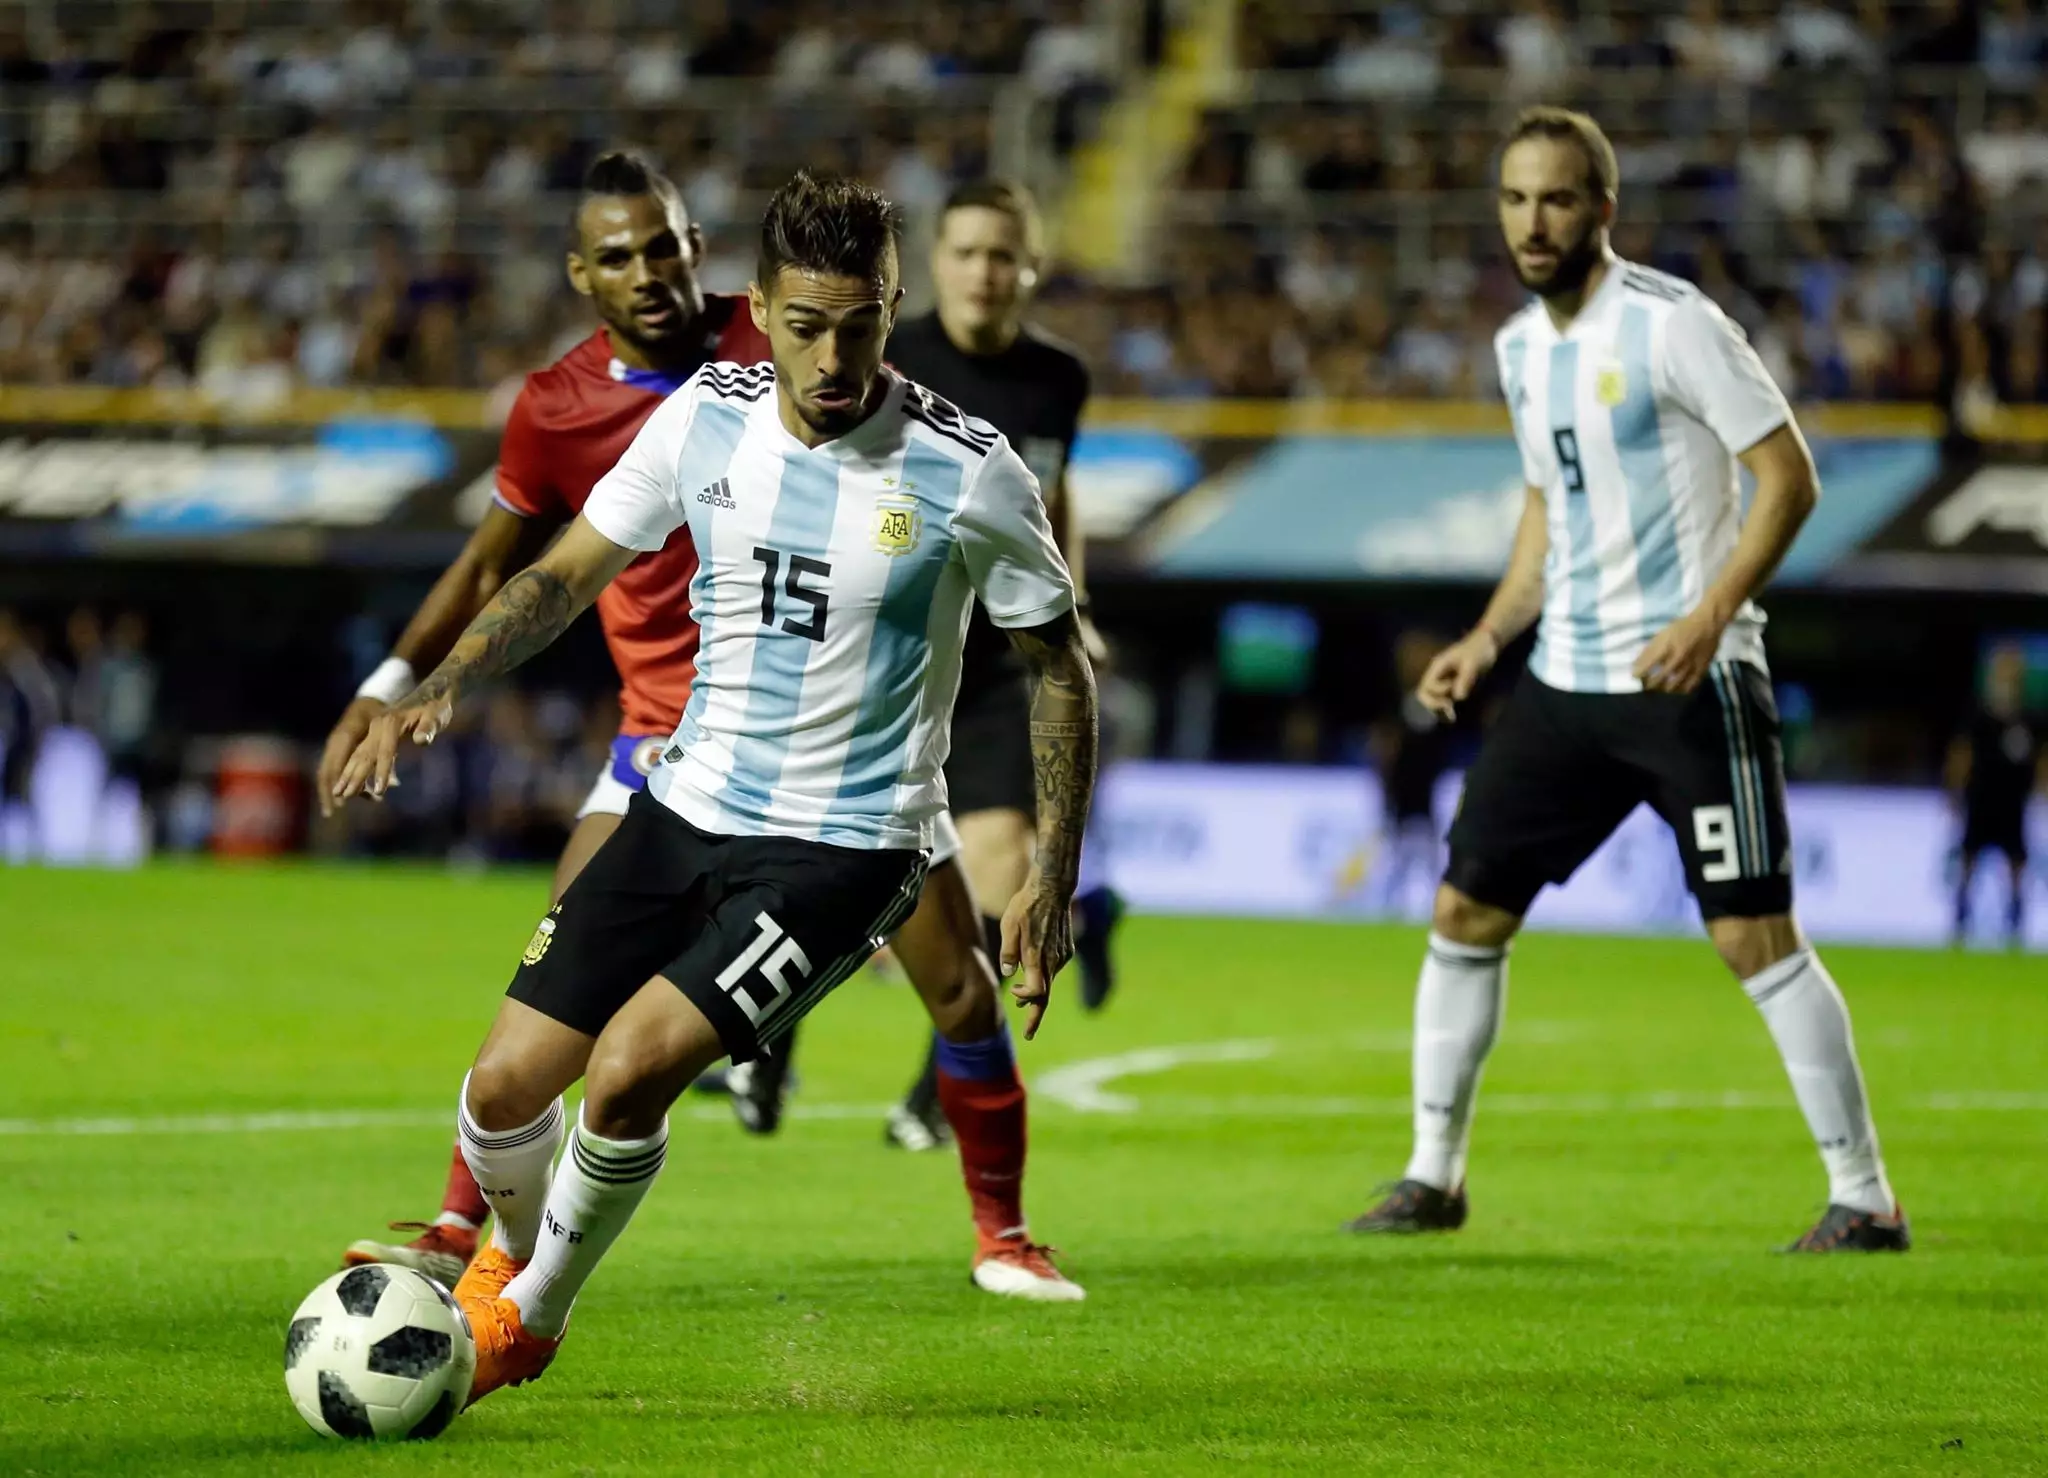 Lanzini in action for Argentina prior to his injury. Image: PA